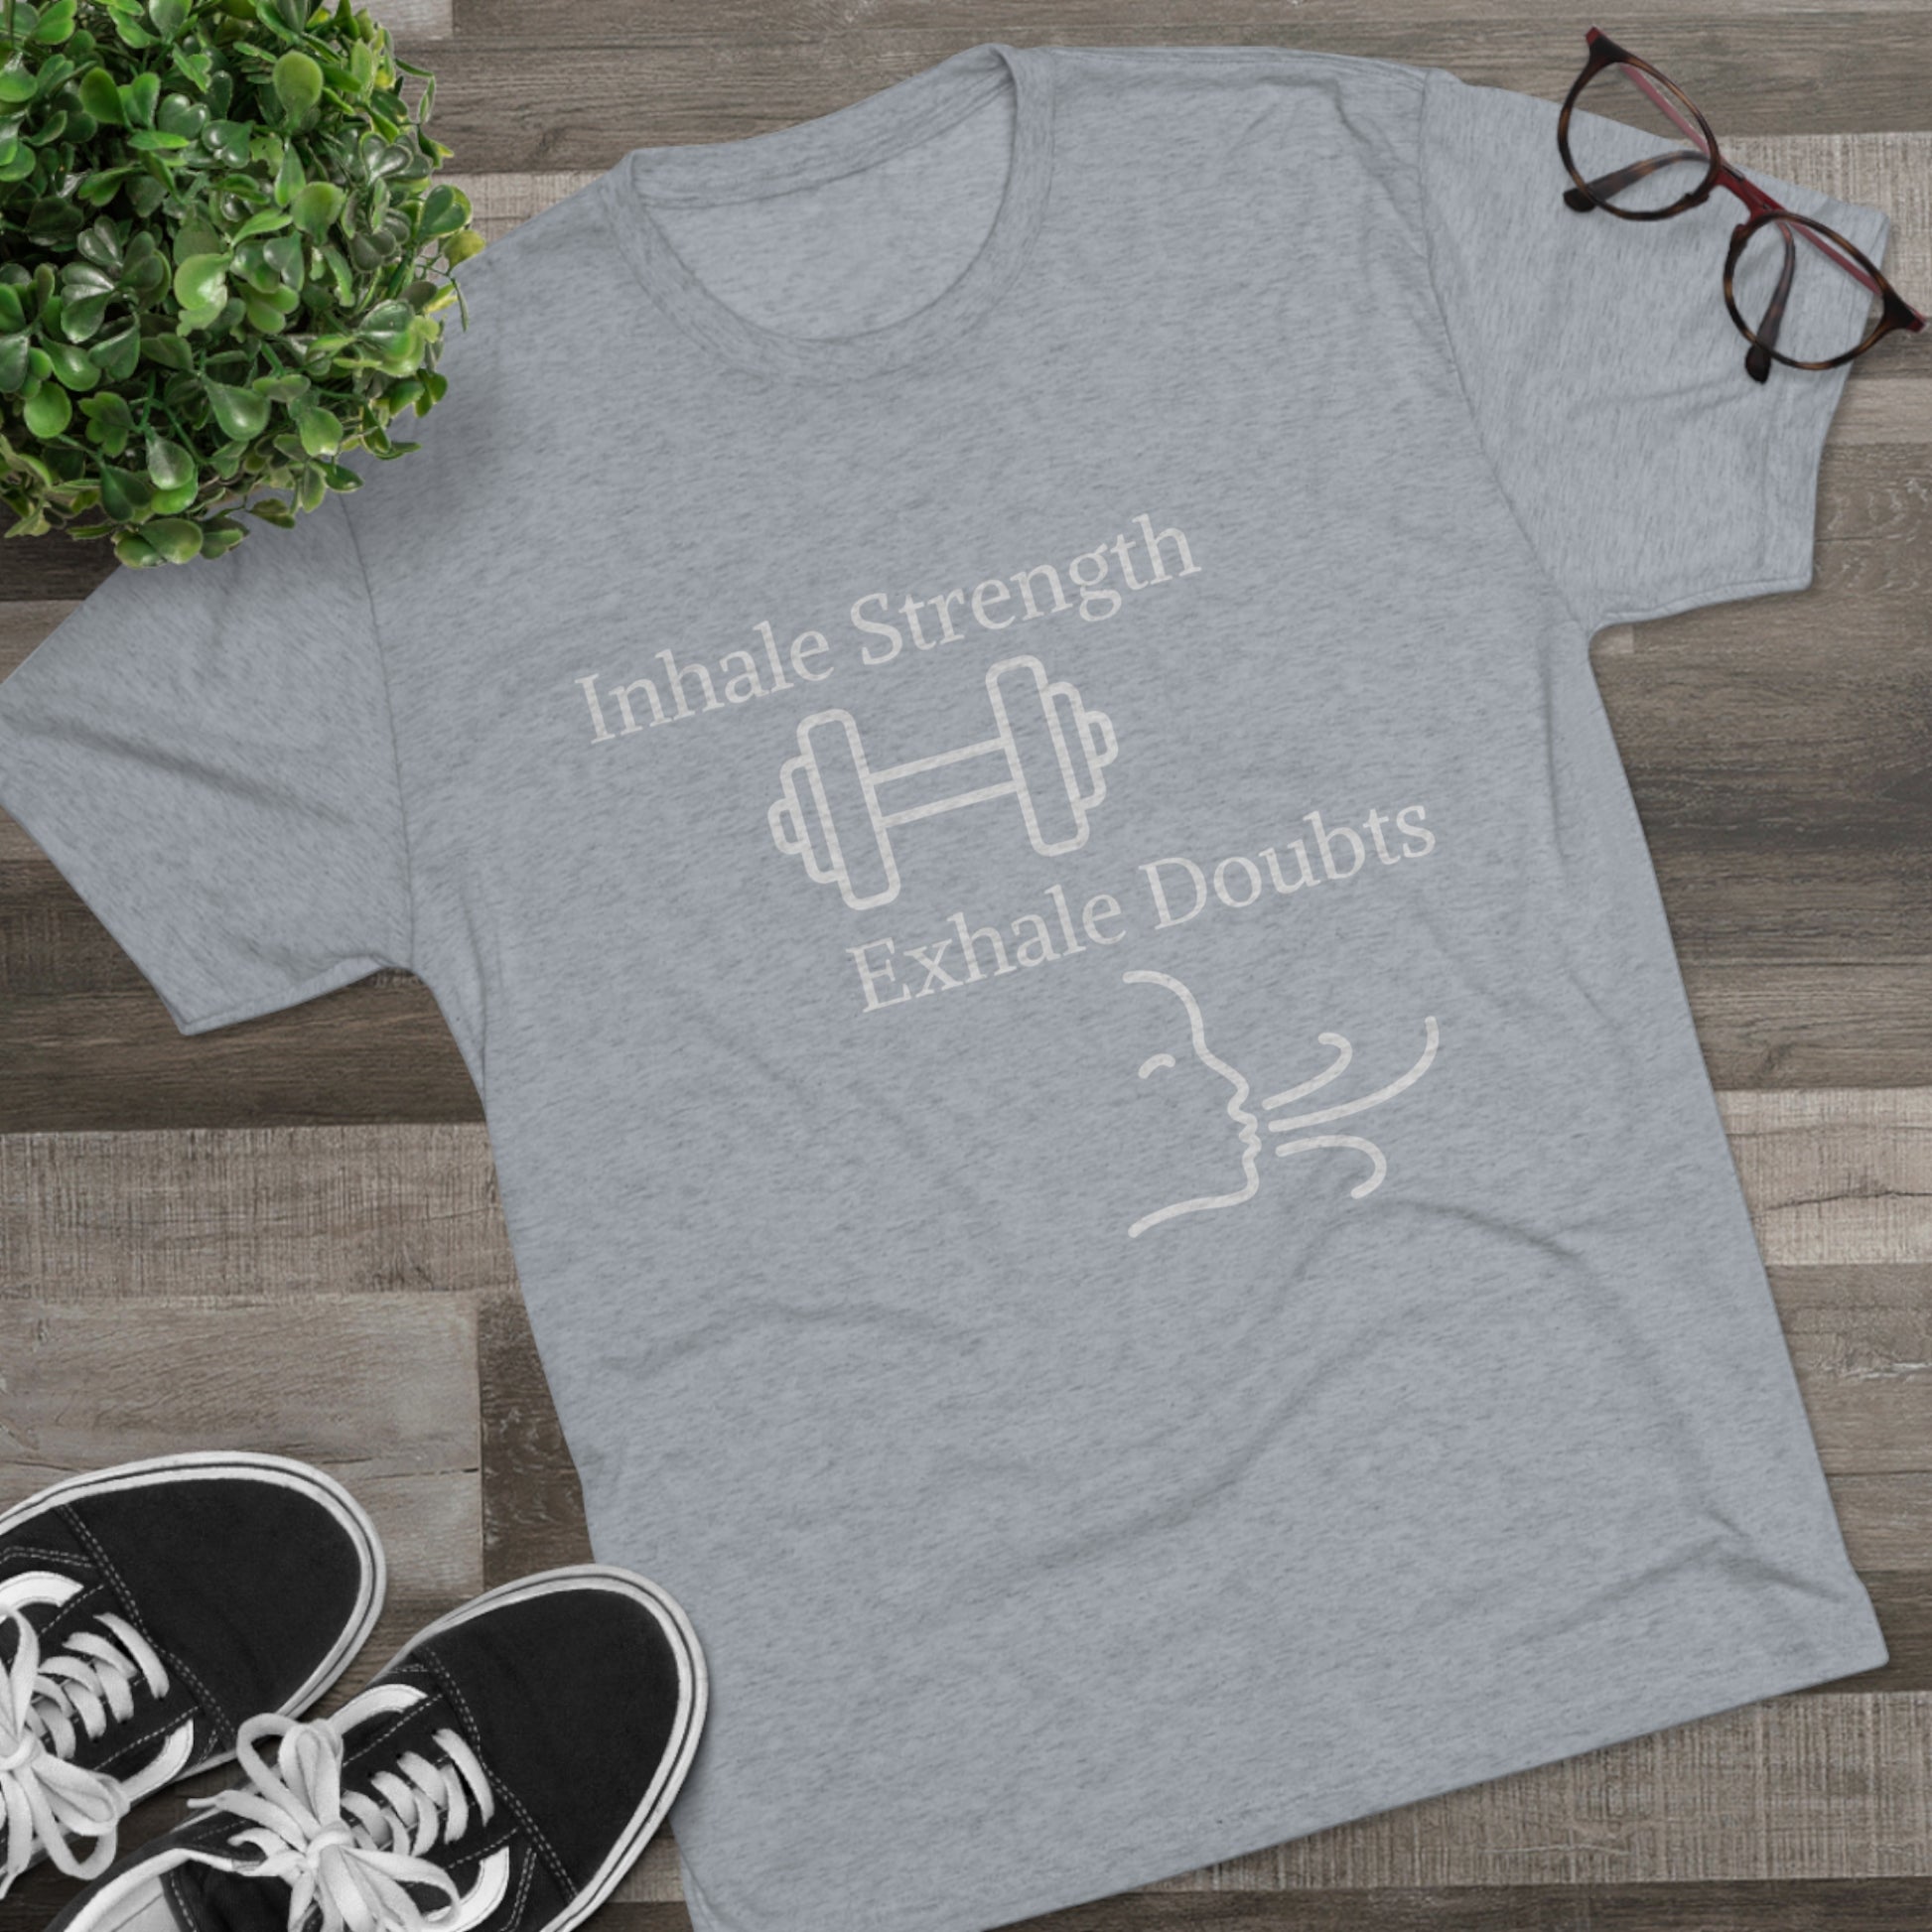 Blue Inhale Strength Exhale Doubt w Images - Unisex Tri-Blend Crew Tee by Printify displayed on a wooden floor with sneakers and glasses beside it.